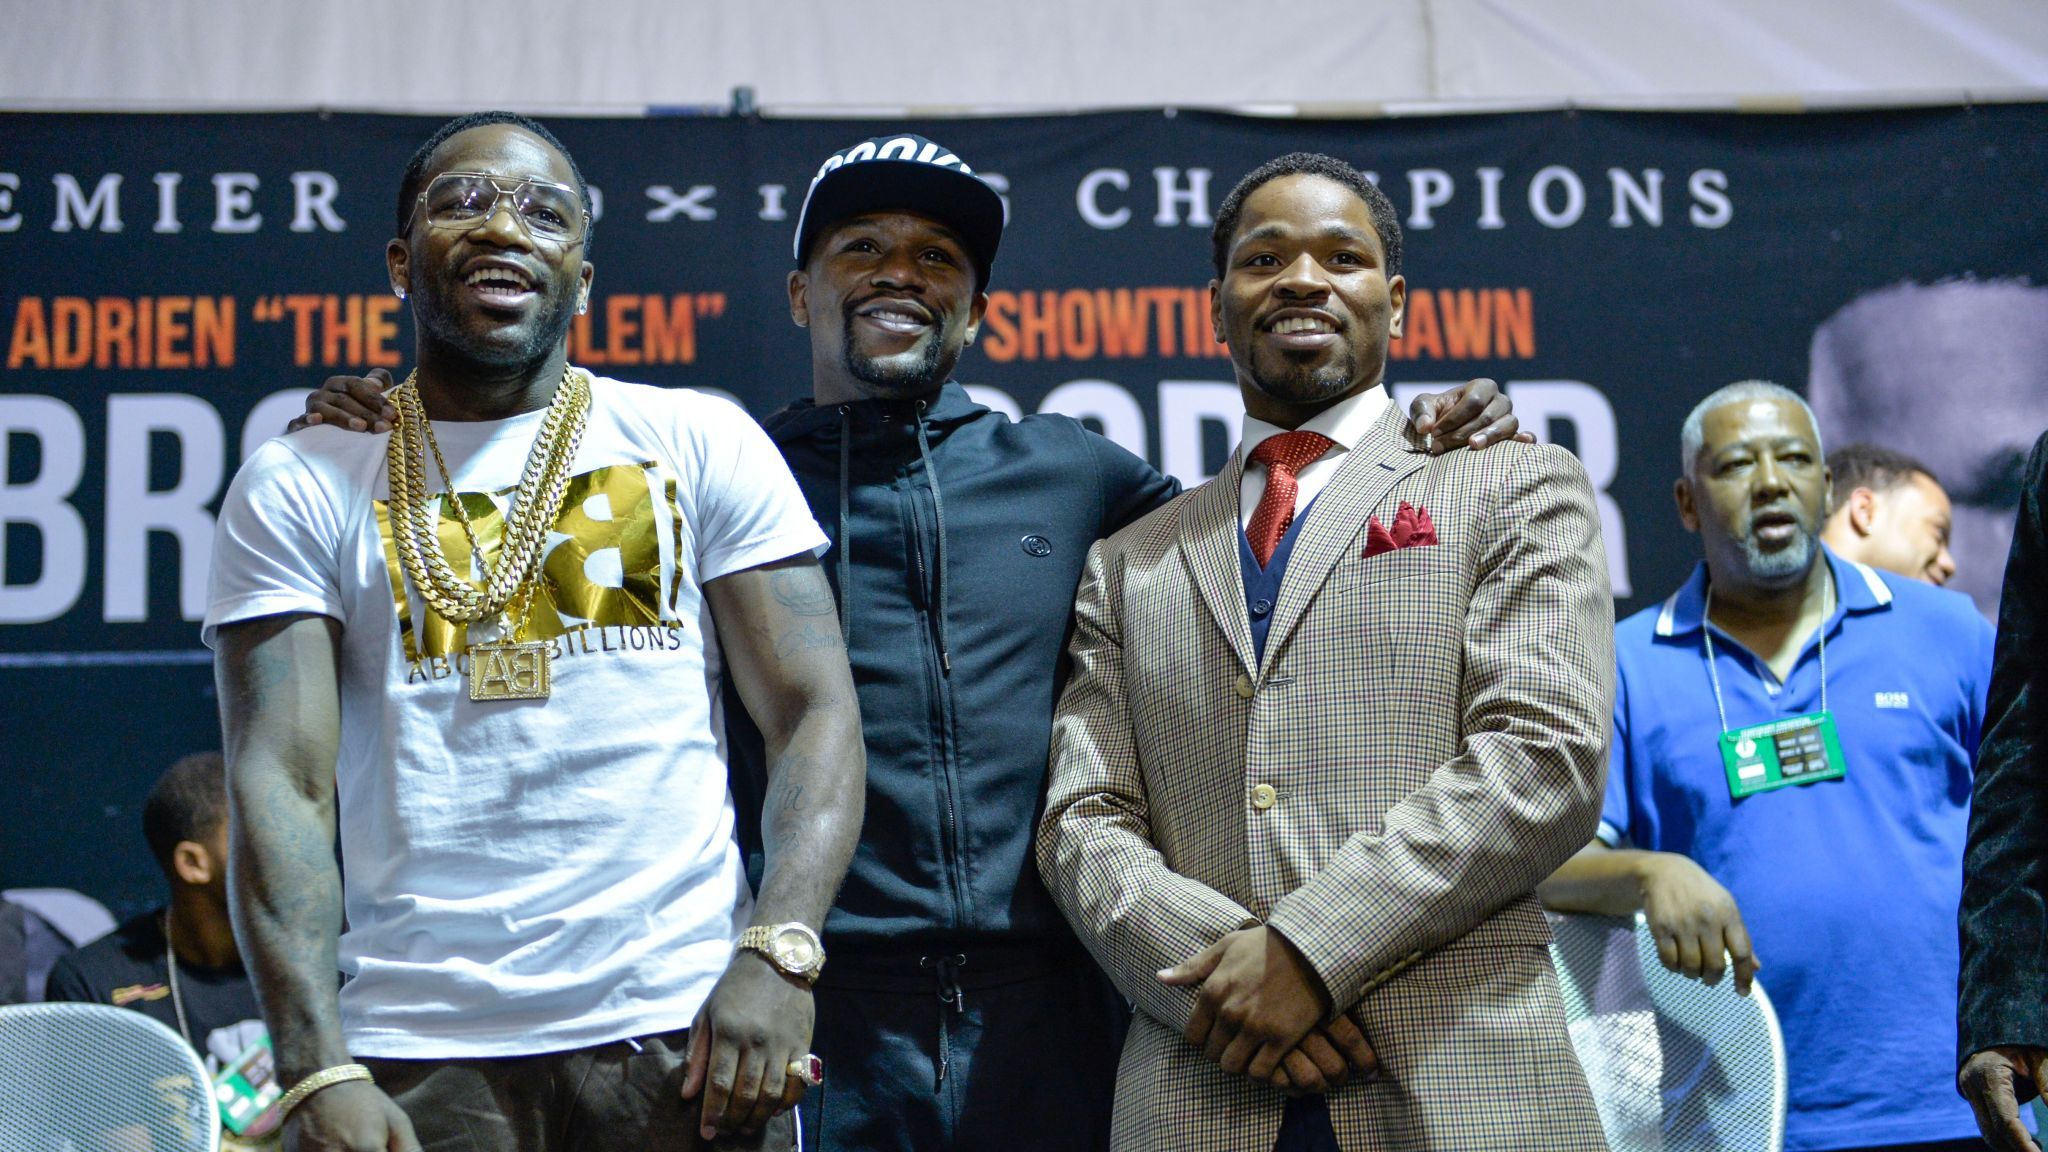 Broner Alongside Mayweather Ahead Of His Fight With - Adrien Broner And Floyd Mayweather - HD Wallpaper 